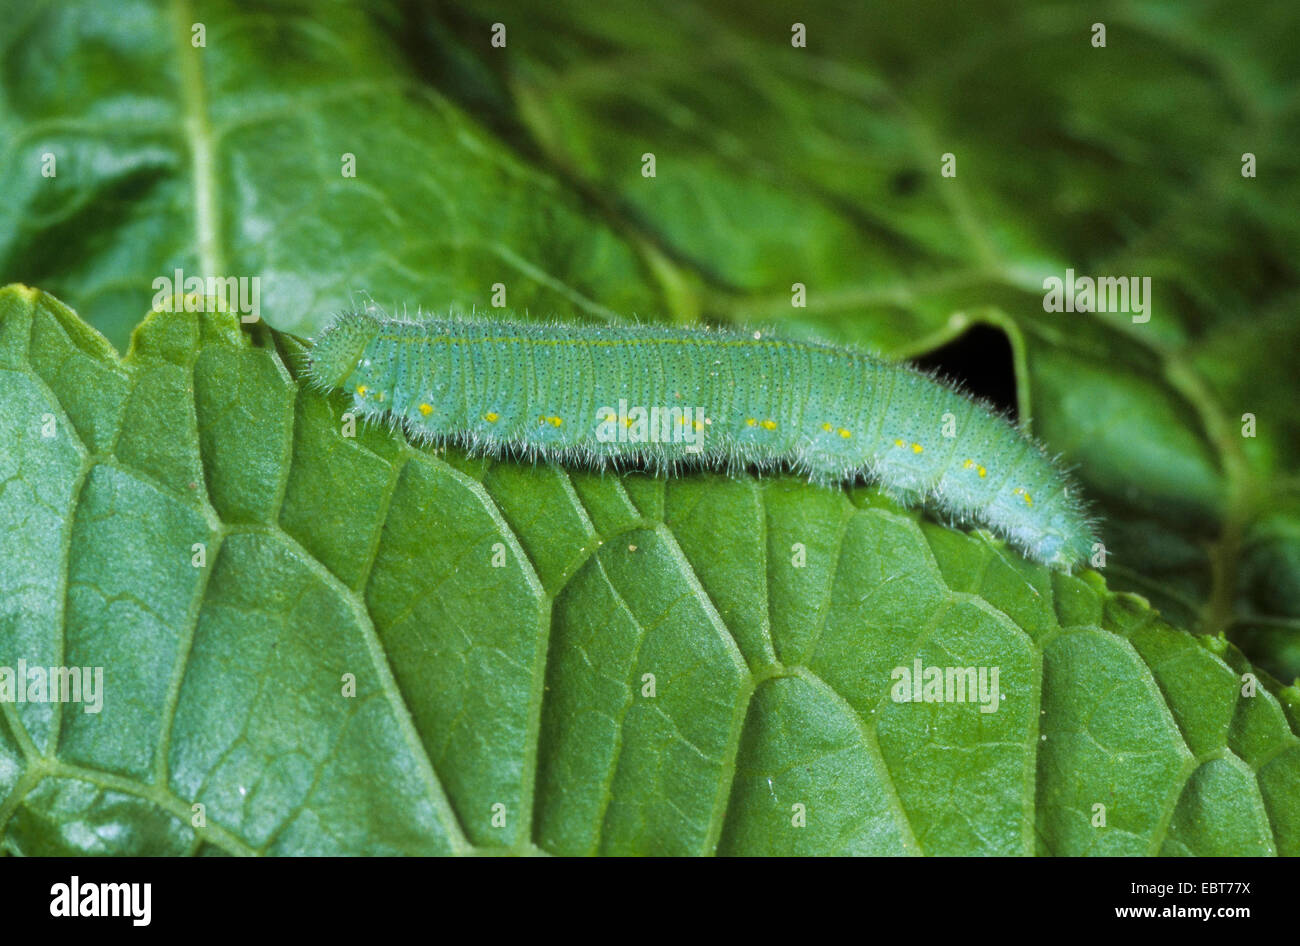 Small white, Cabbage butterfly, Imported cabbageworm (Pieris rapae, Artogeia rapae), caterpillar on a leaf, Germany Stock Photo